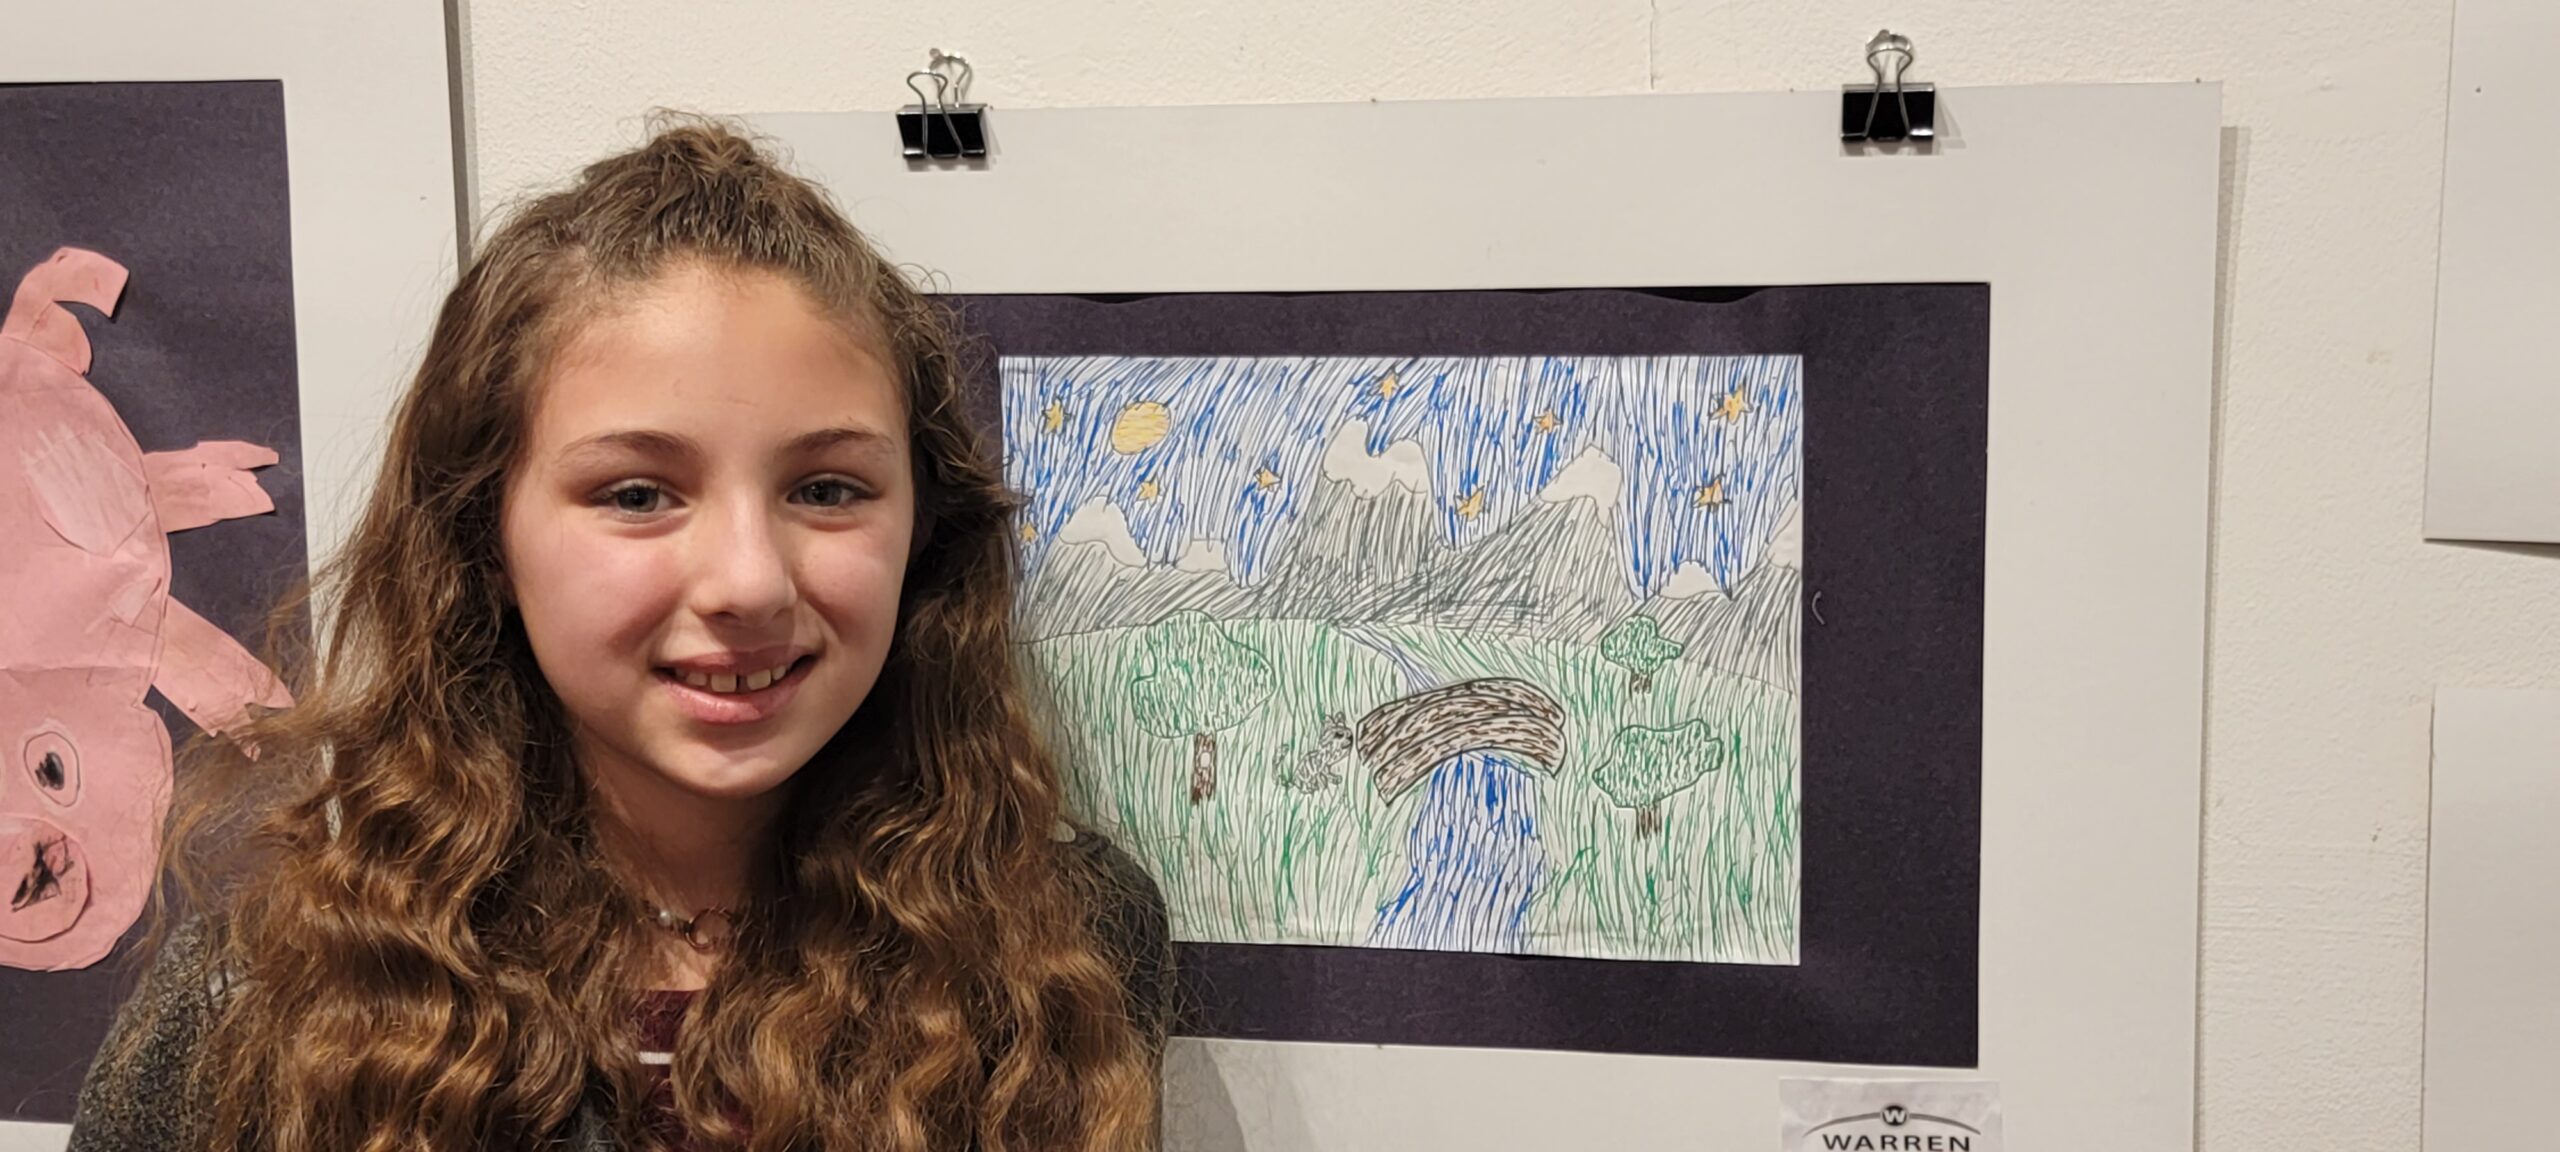 WCS Student Works on Display at Trumbull Art Gallery